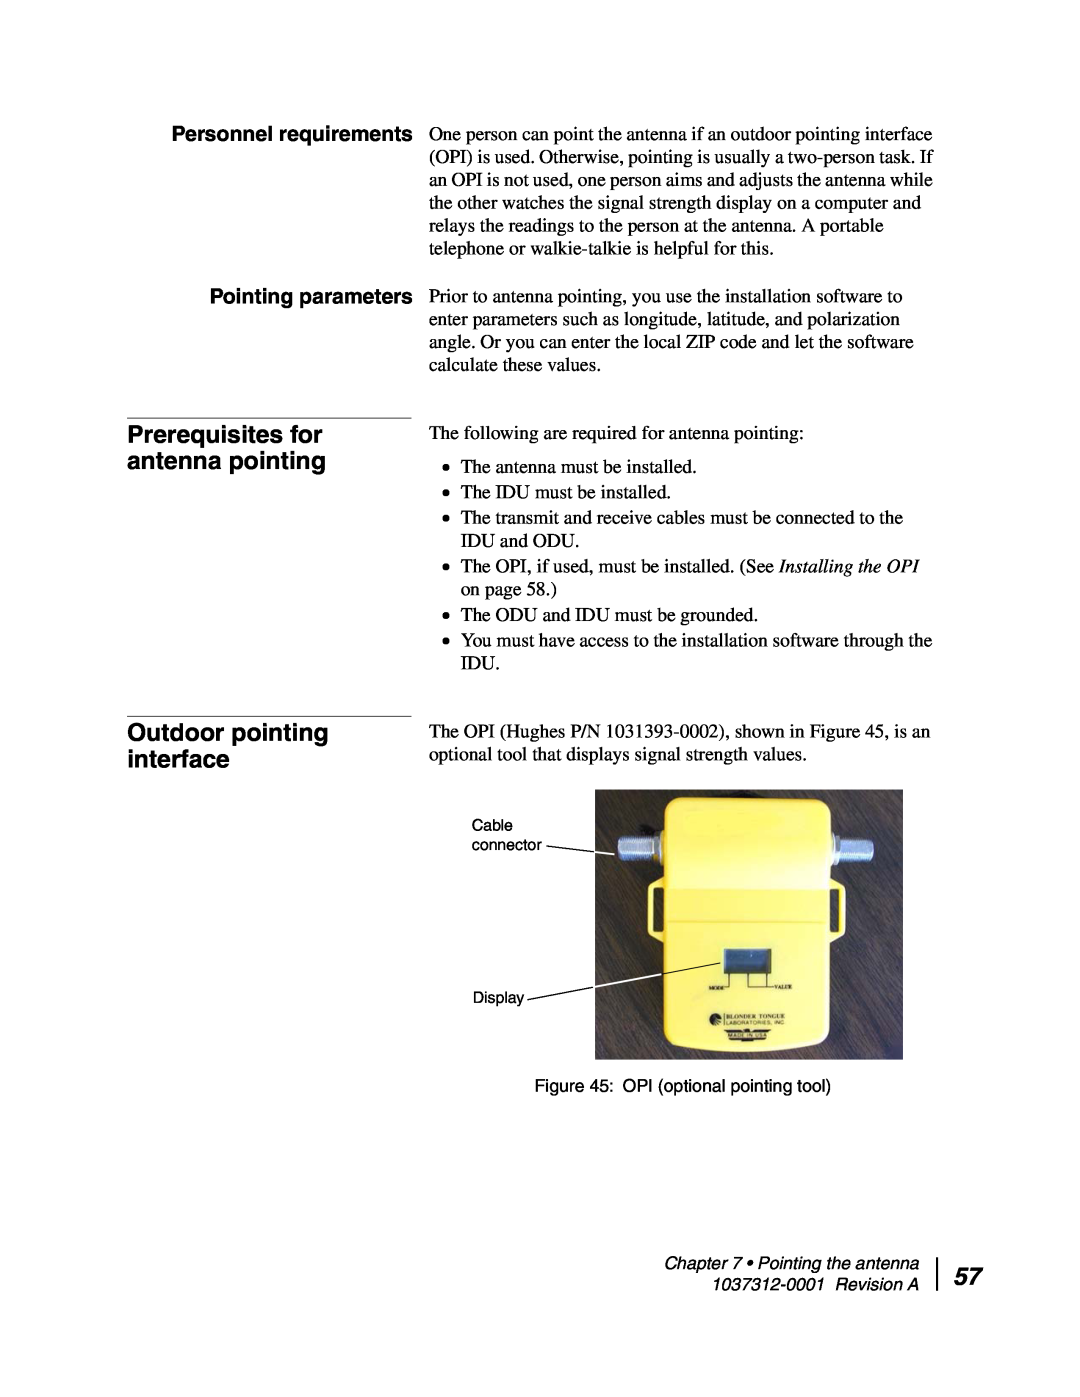 Hughes AN6-098P installation manual Prerequisites for antenna pointing, Outdoor pointing interface 